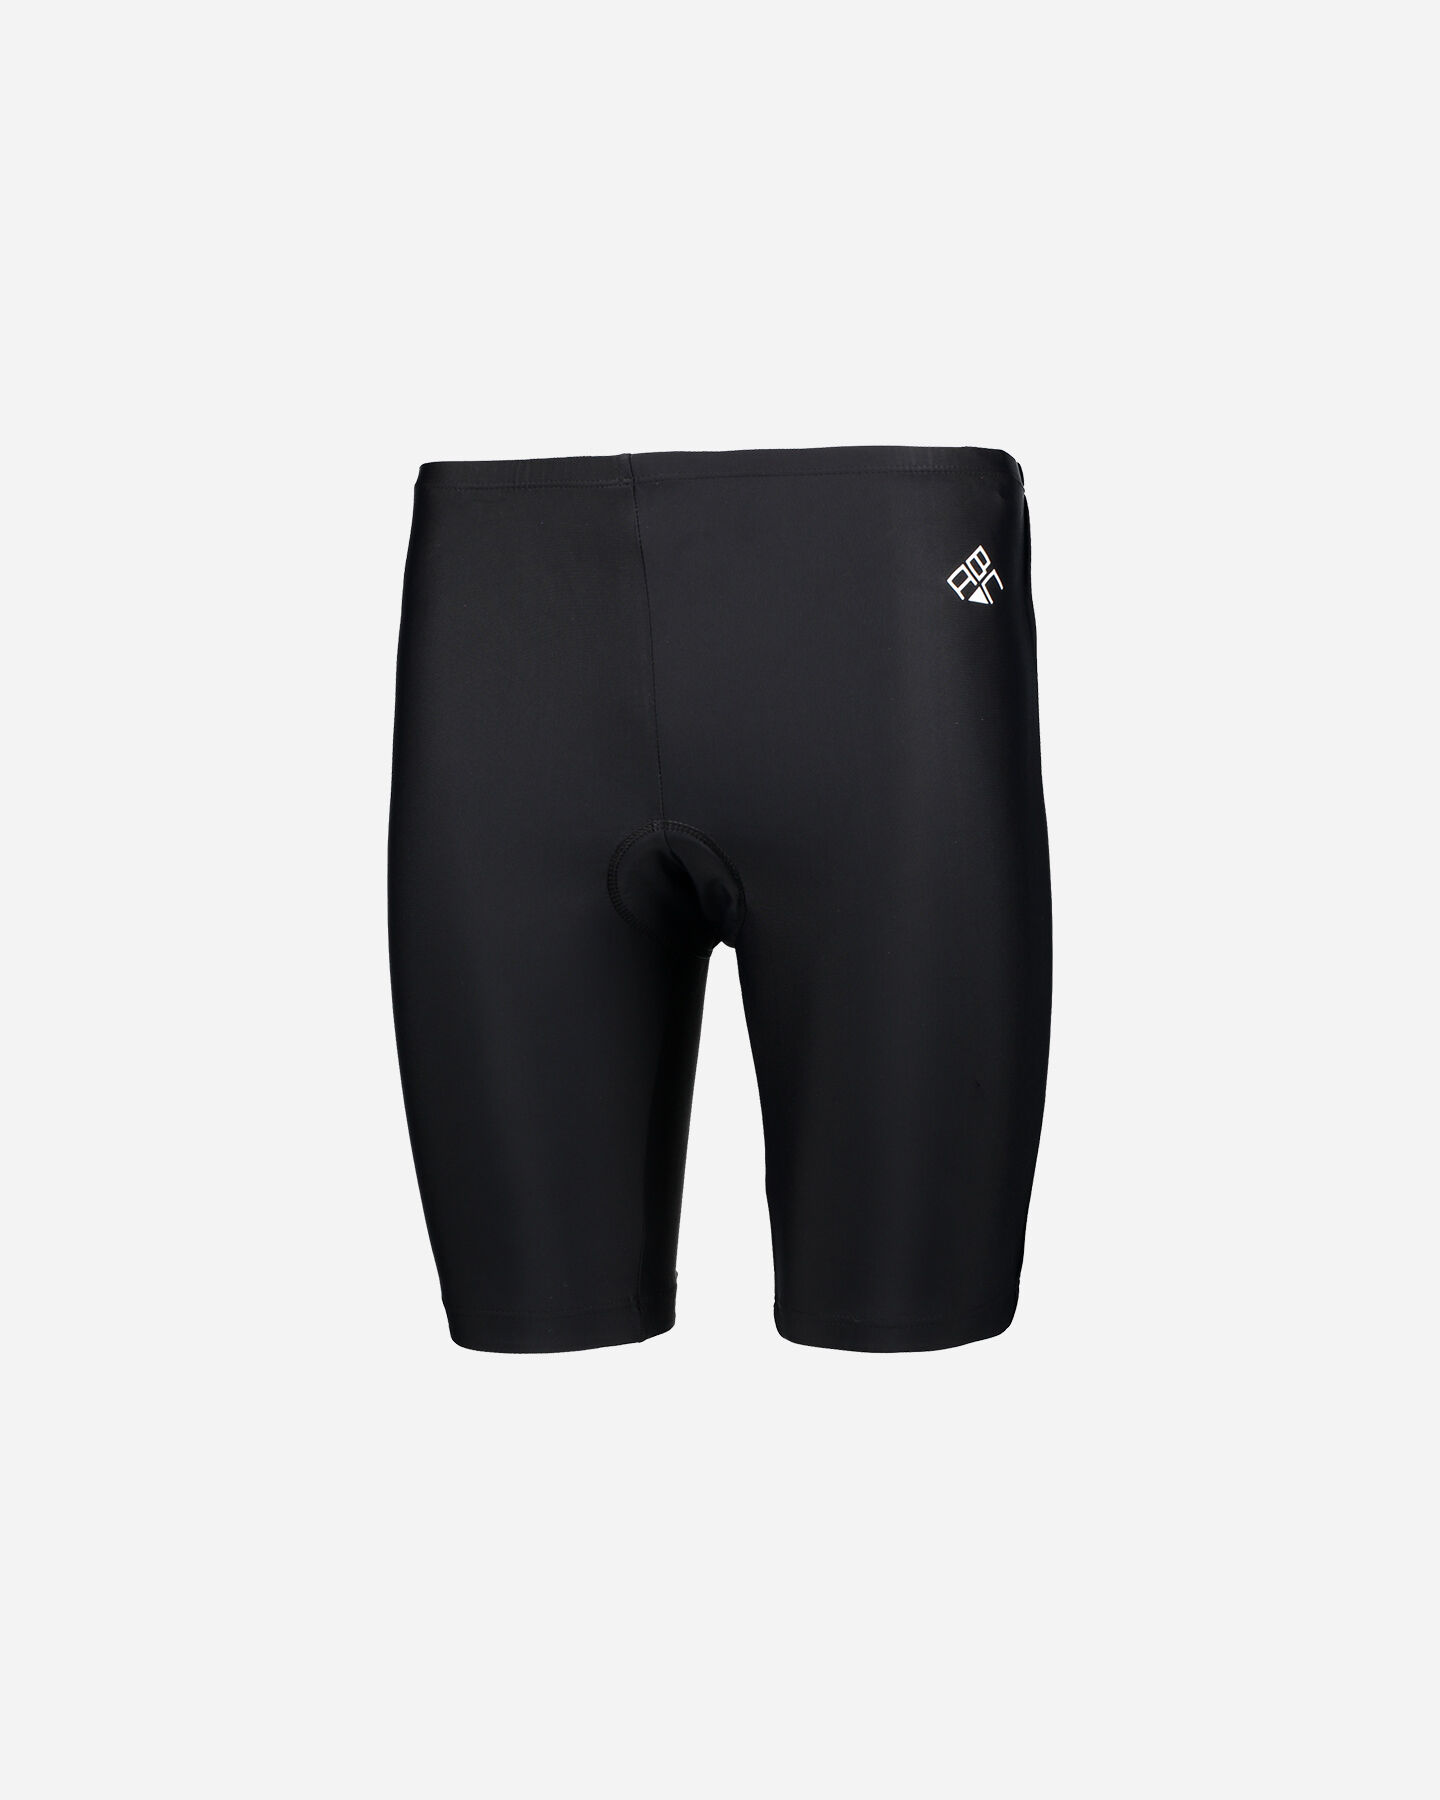  Short ciclismo ABC SUPPLEX SPINNING M S1126247 scatto 0